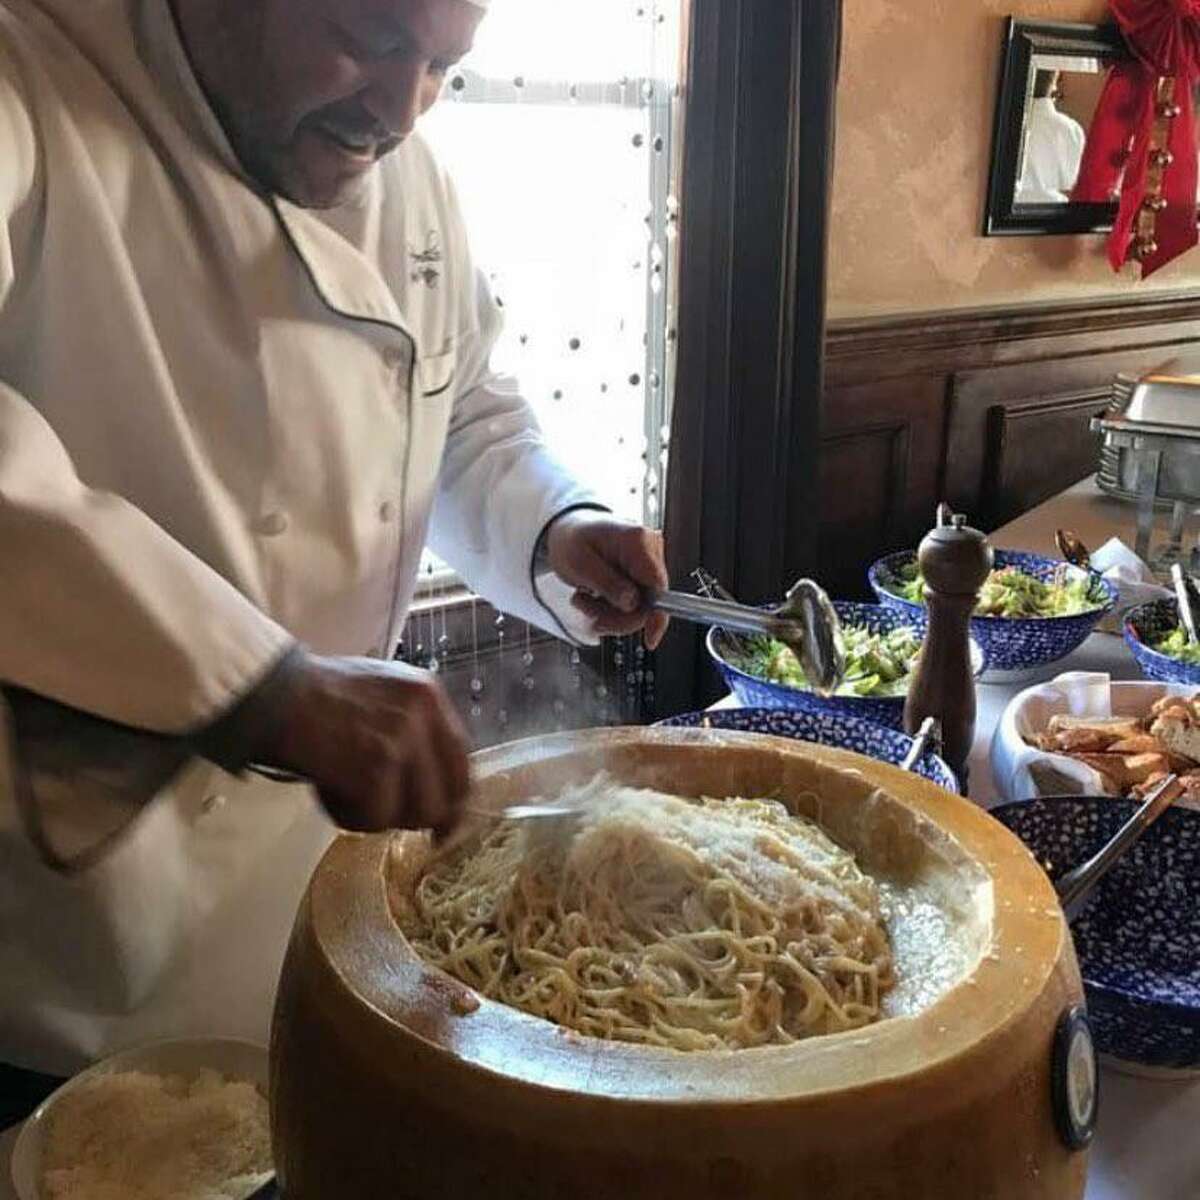 A made-to-order pasta dish inside a giant wheel of cheese? You can get it  in CT.